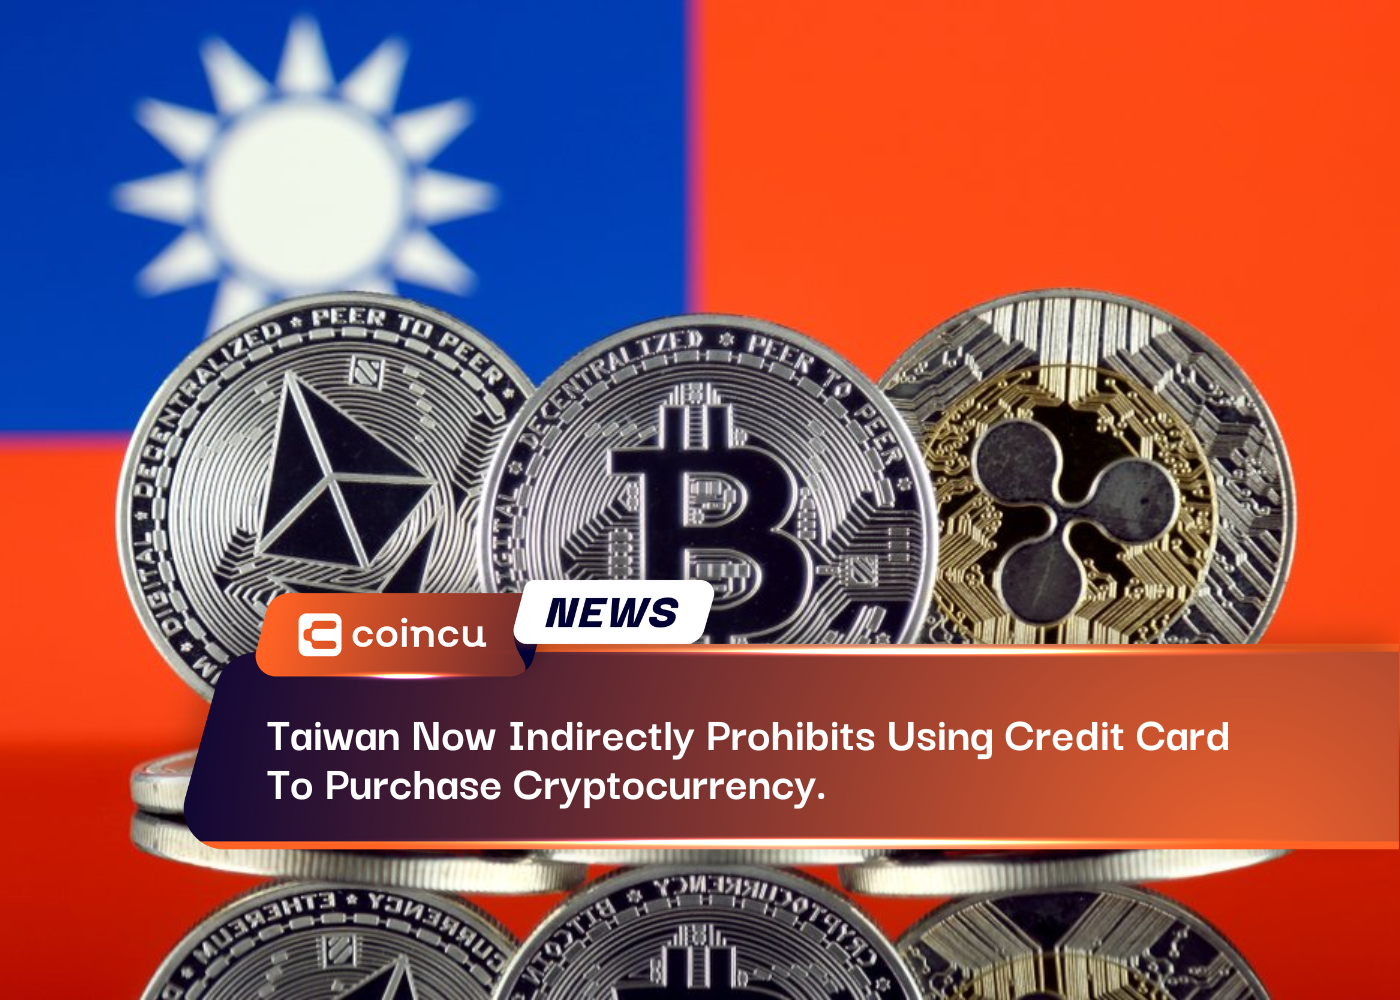 Taiwan Now Indirectly Prohibits Using Credit Card To Purchase Cryptocurrency.